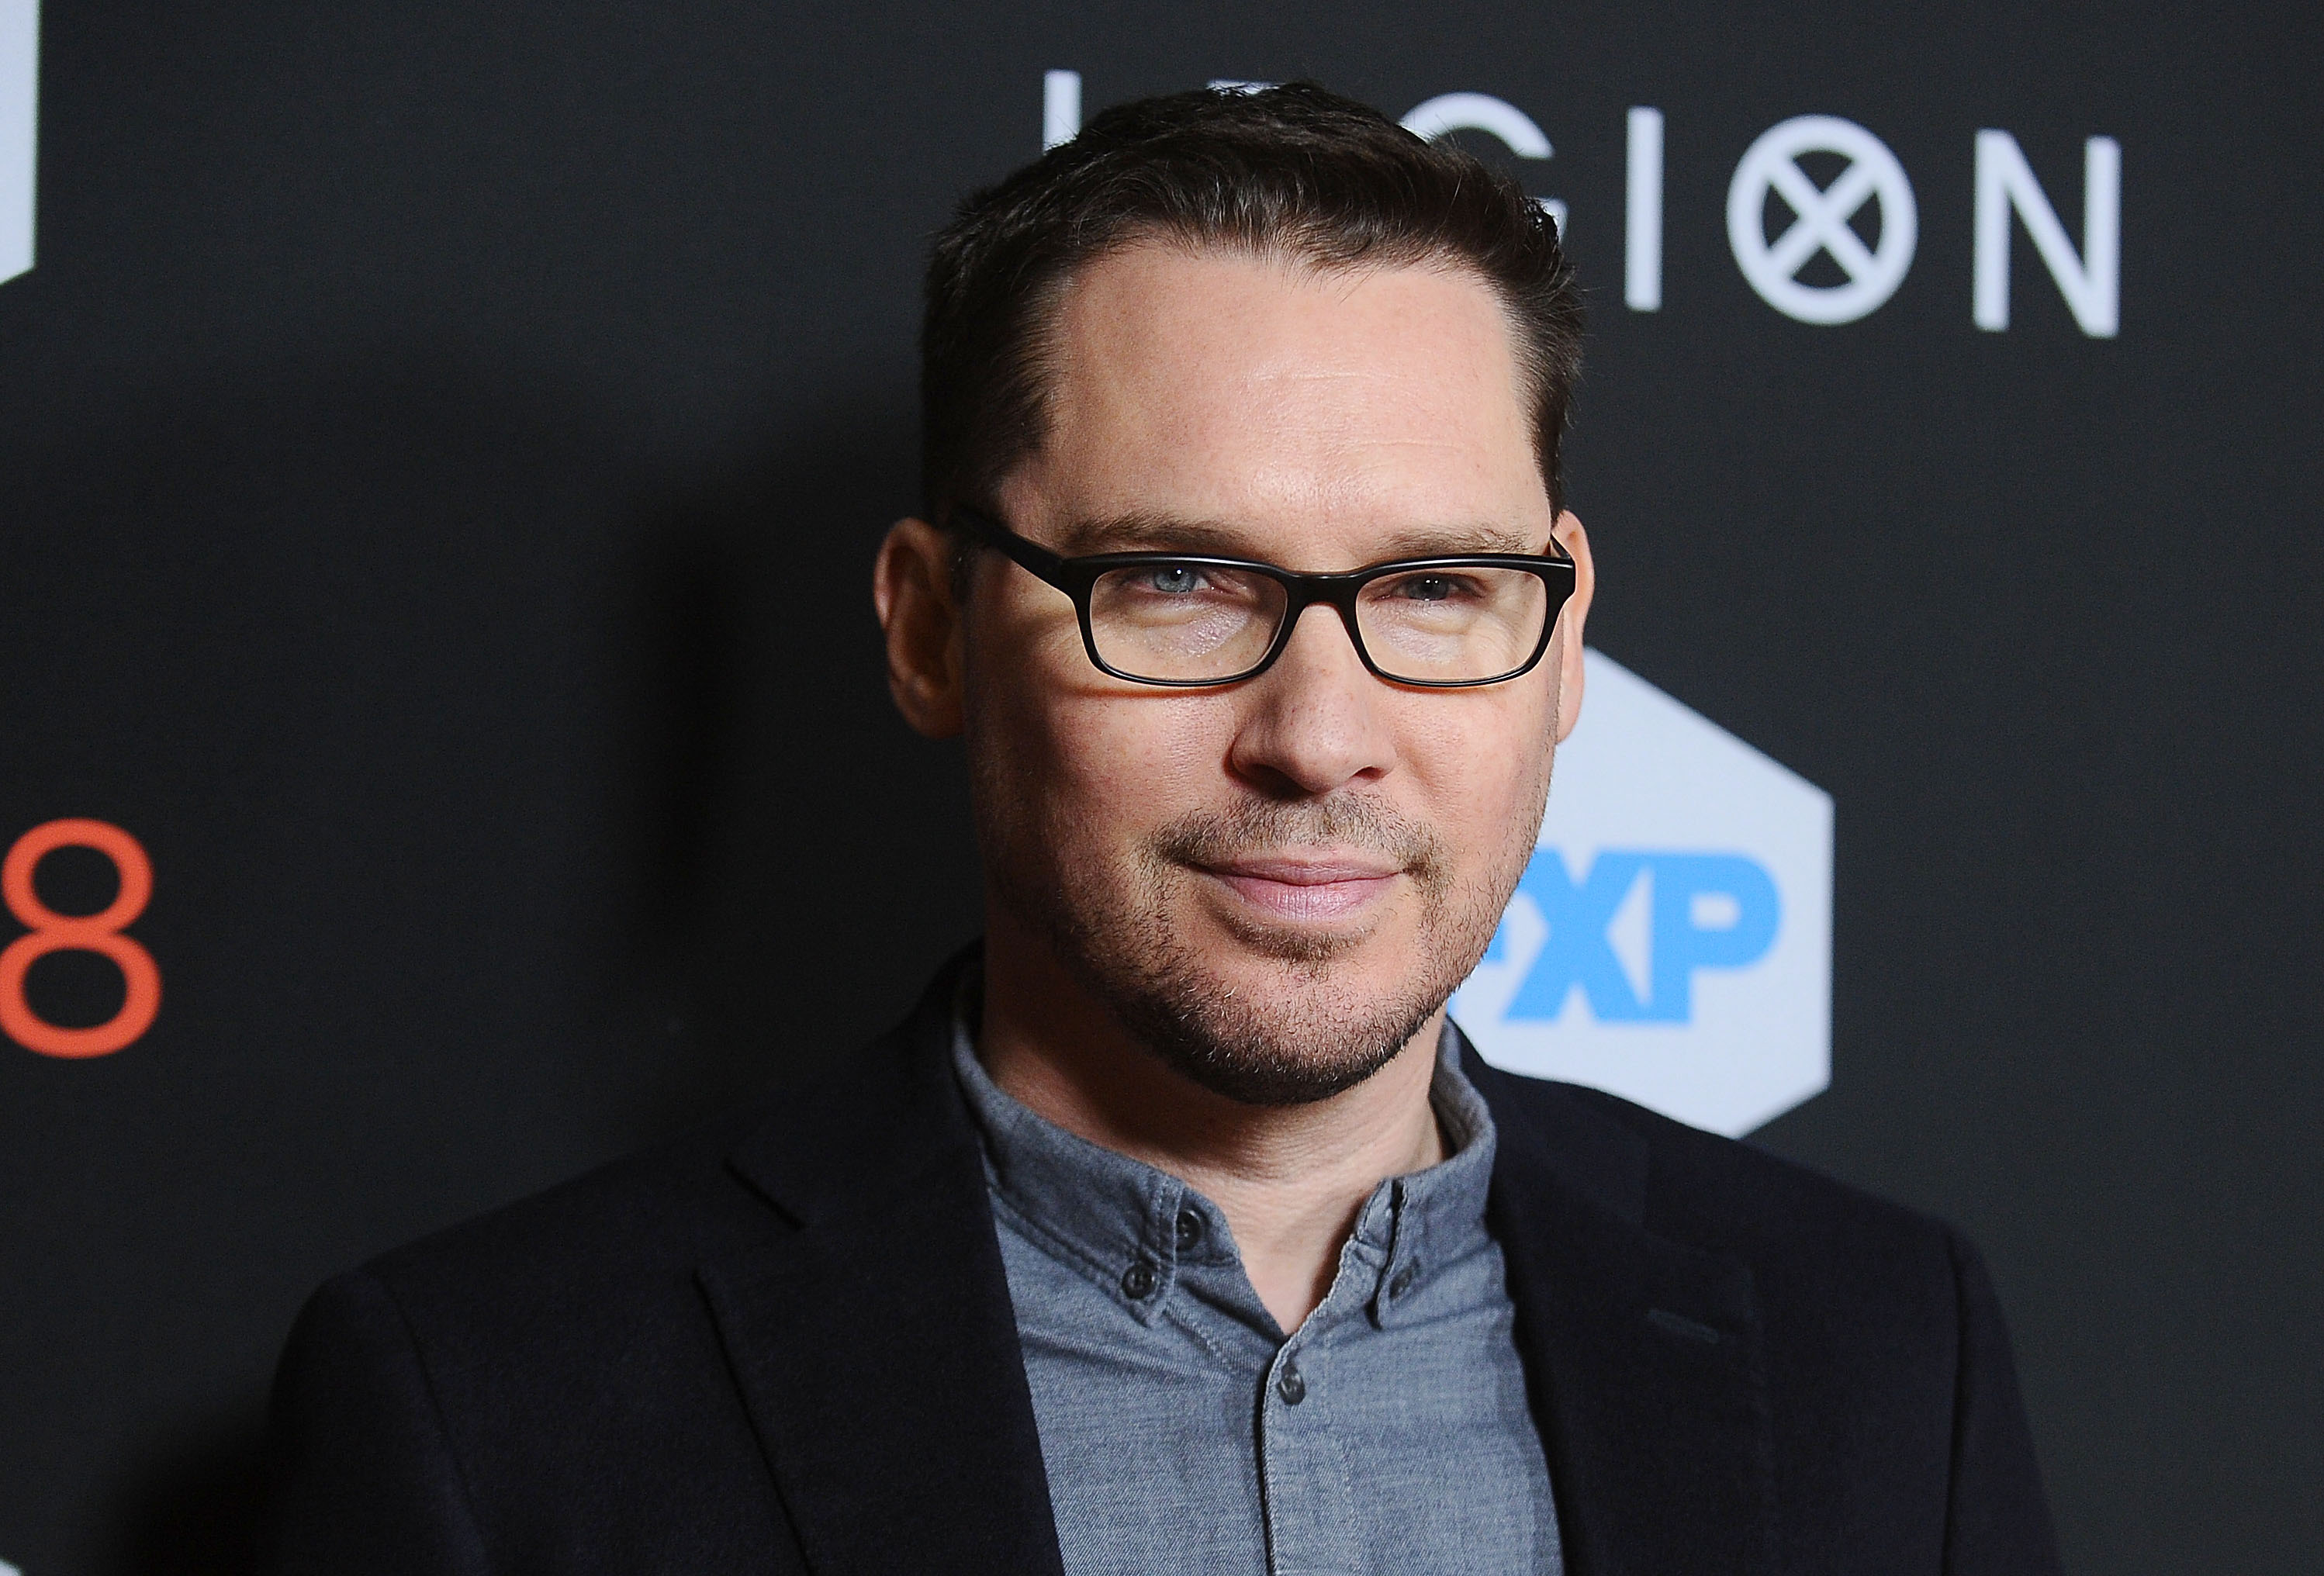 Producer Bryan Singer attends the premiere of 